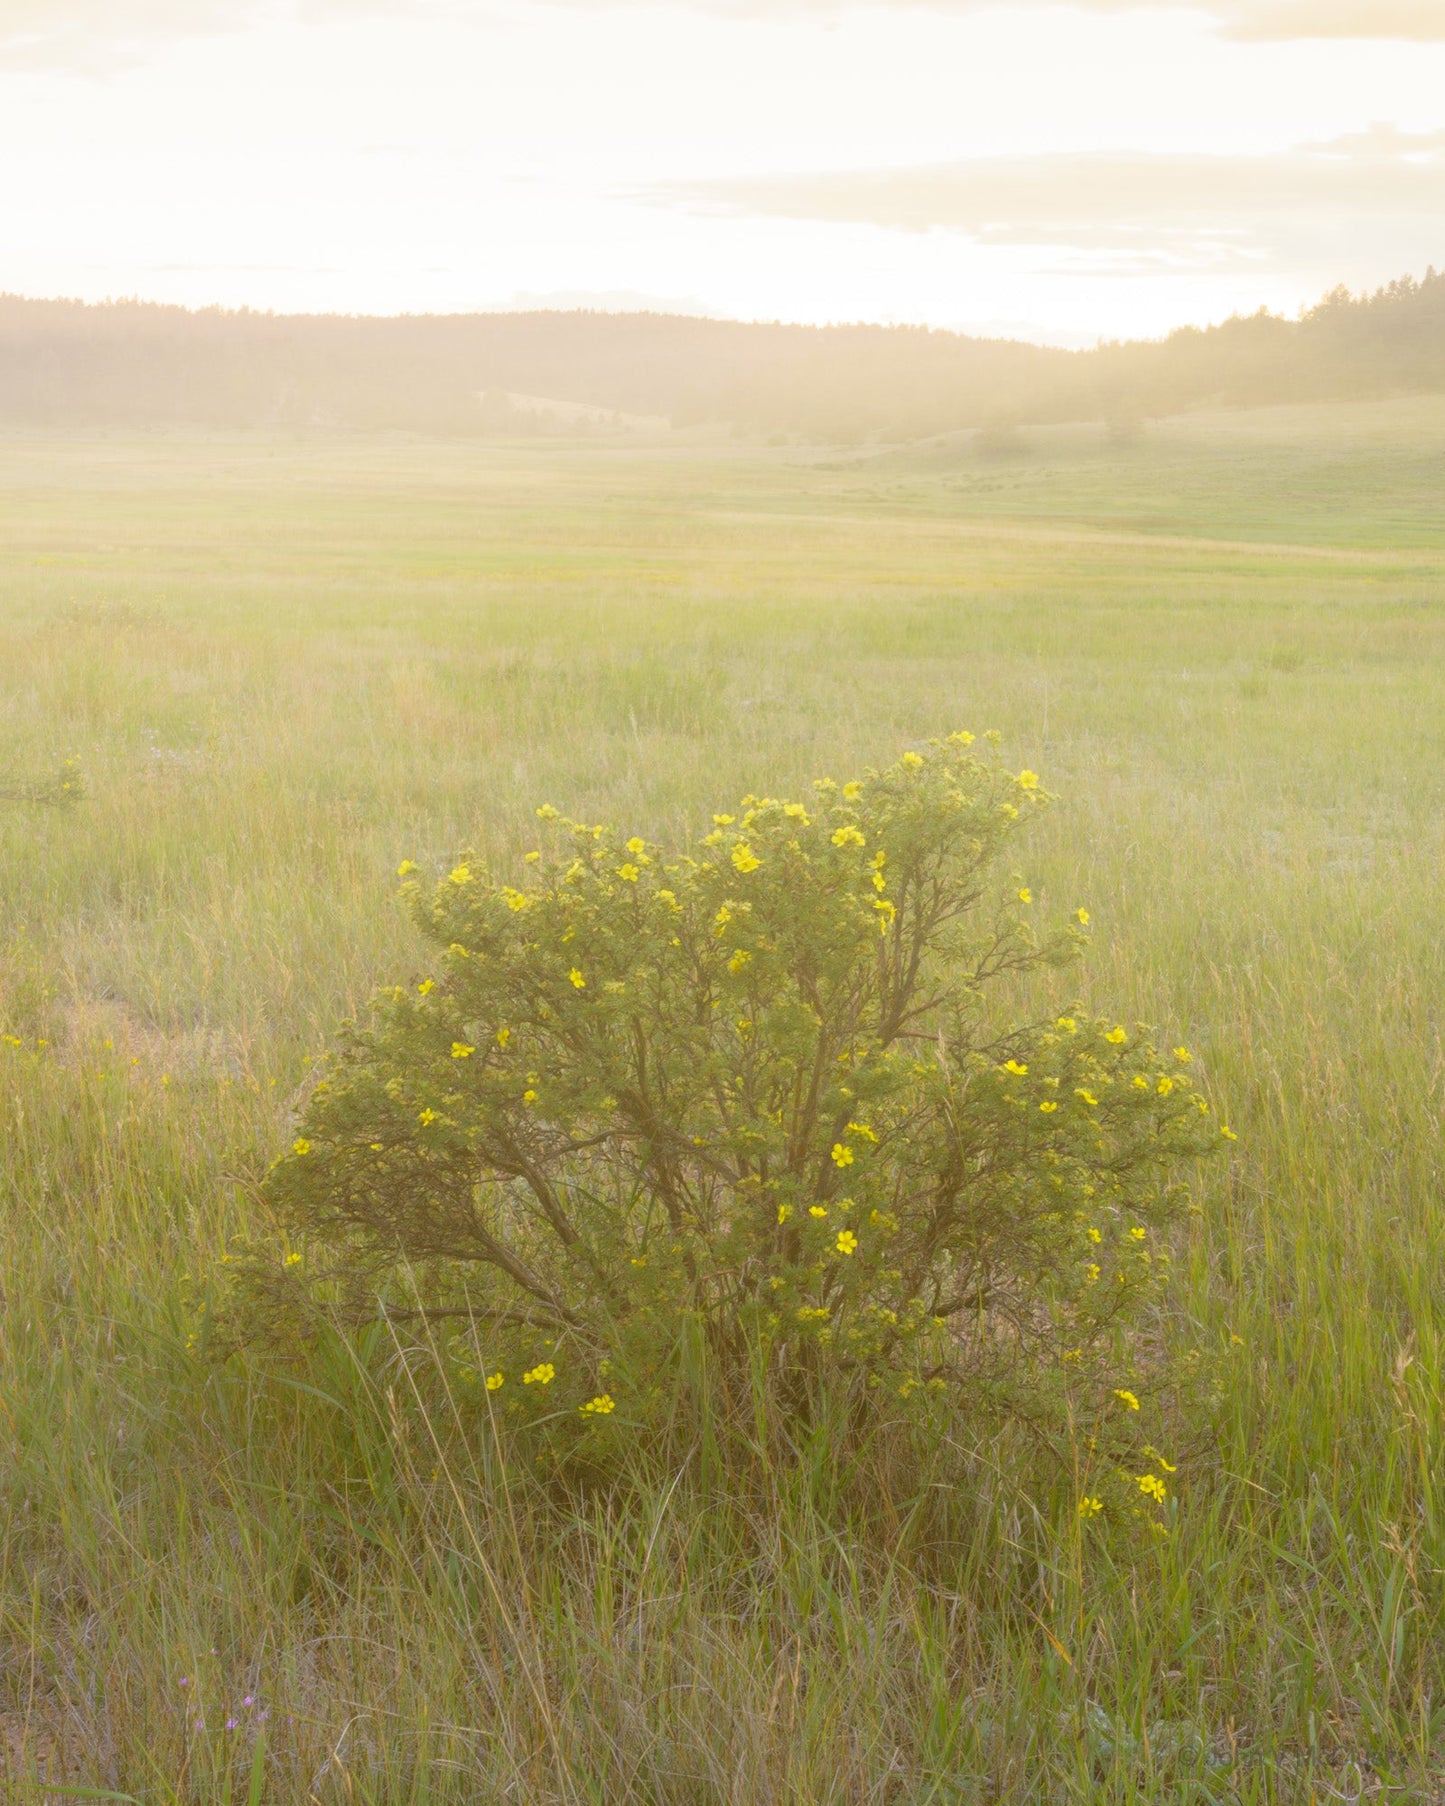 A Cinquefoil bush in bloom in a wide meadow with a misty, dreamlike feel.  Fine art nature photography print by McClusky Nature Photography.